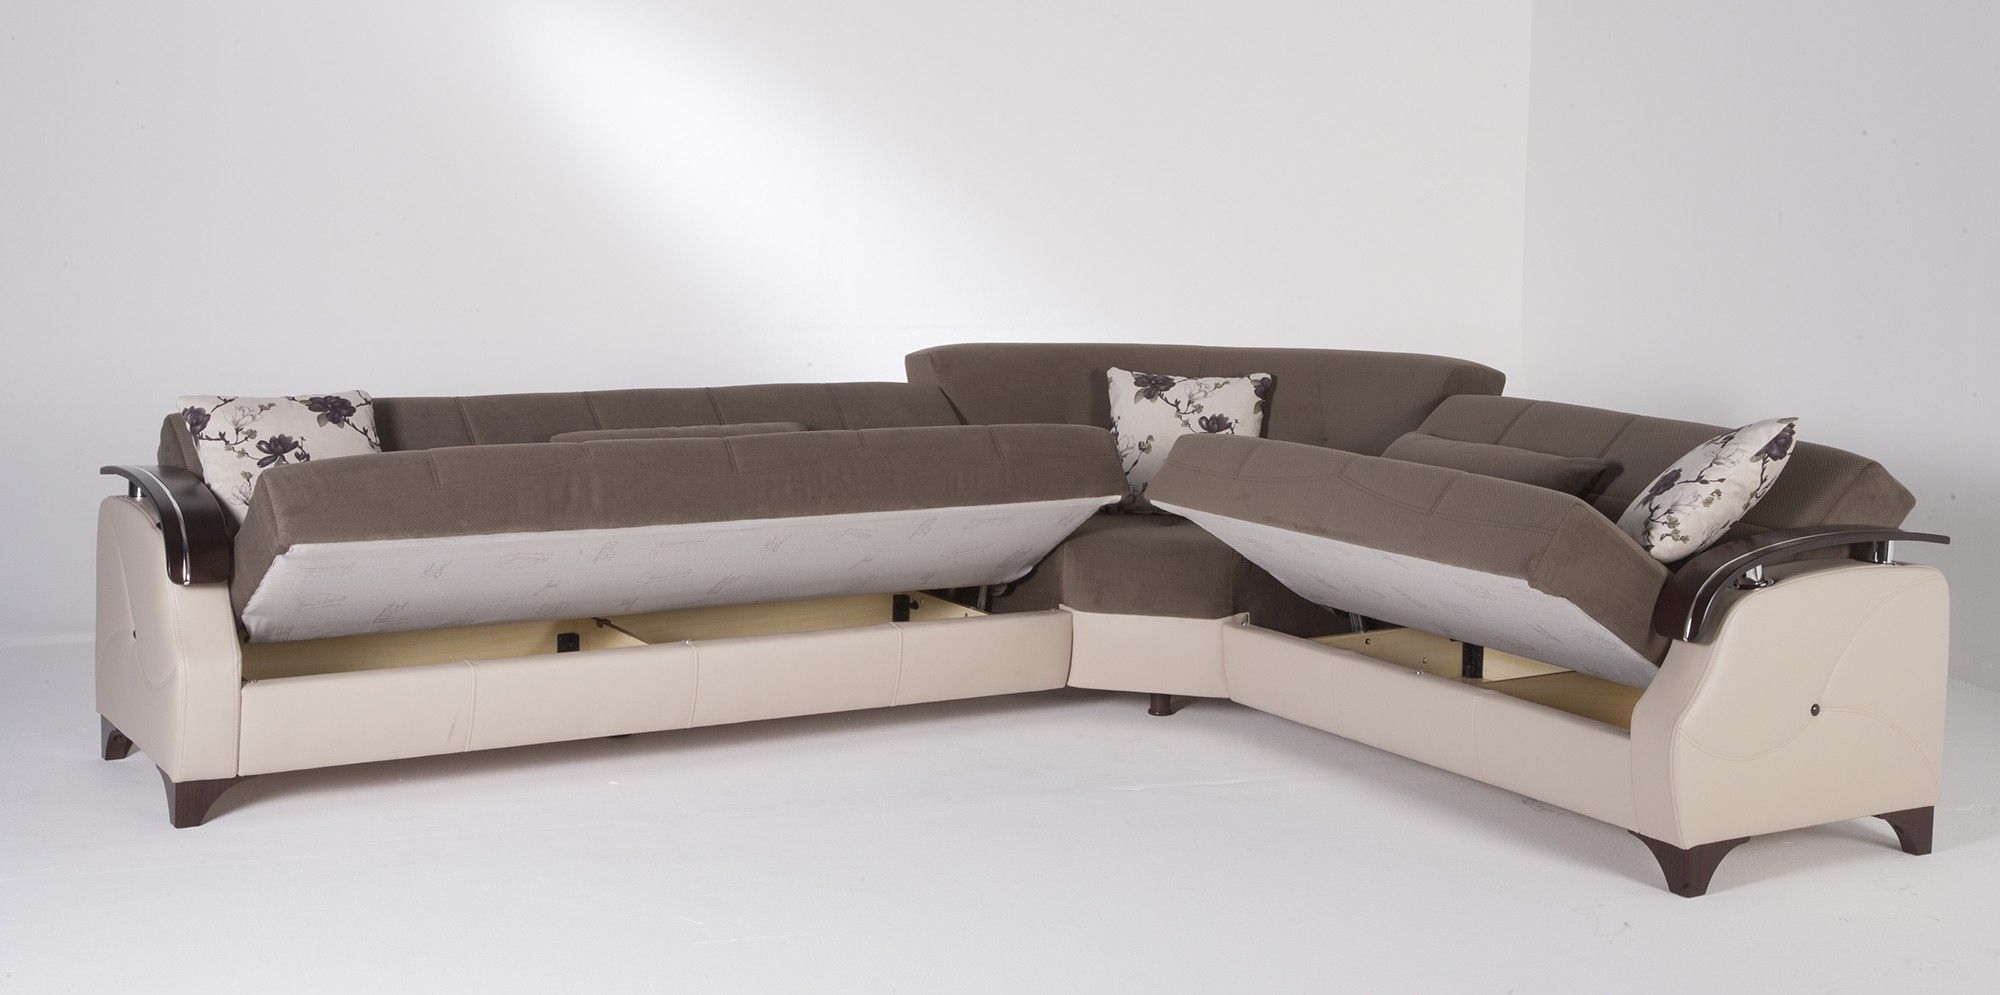 Sectional Sleeper Sofa With Storage – S3net – Sectional Sofas Sale Regarding Sectional Sofas With Storage (Photo 6189 of 7825)